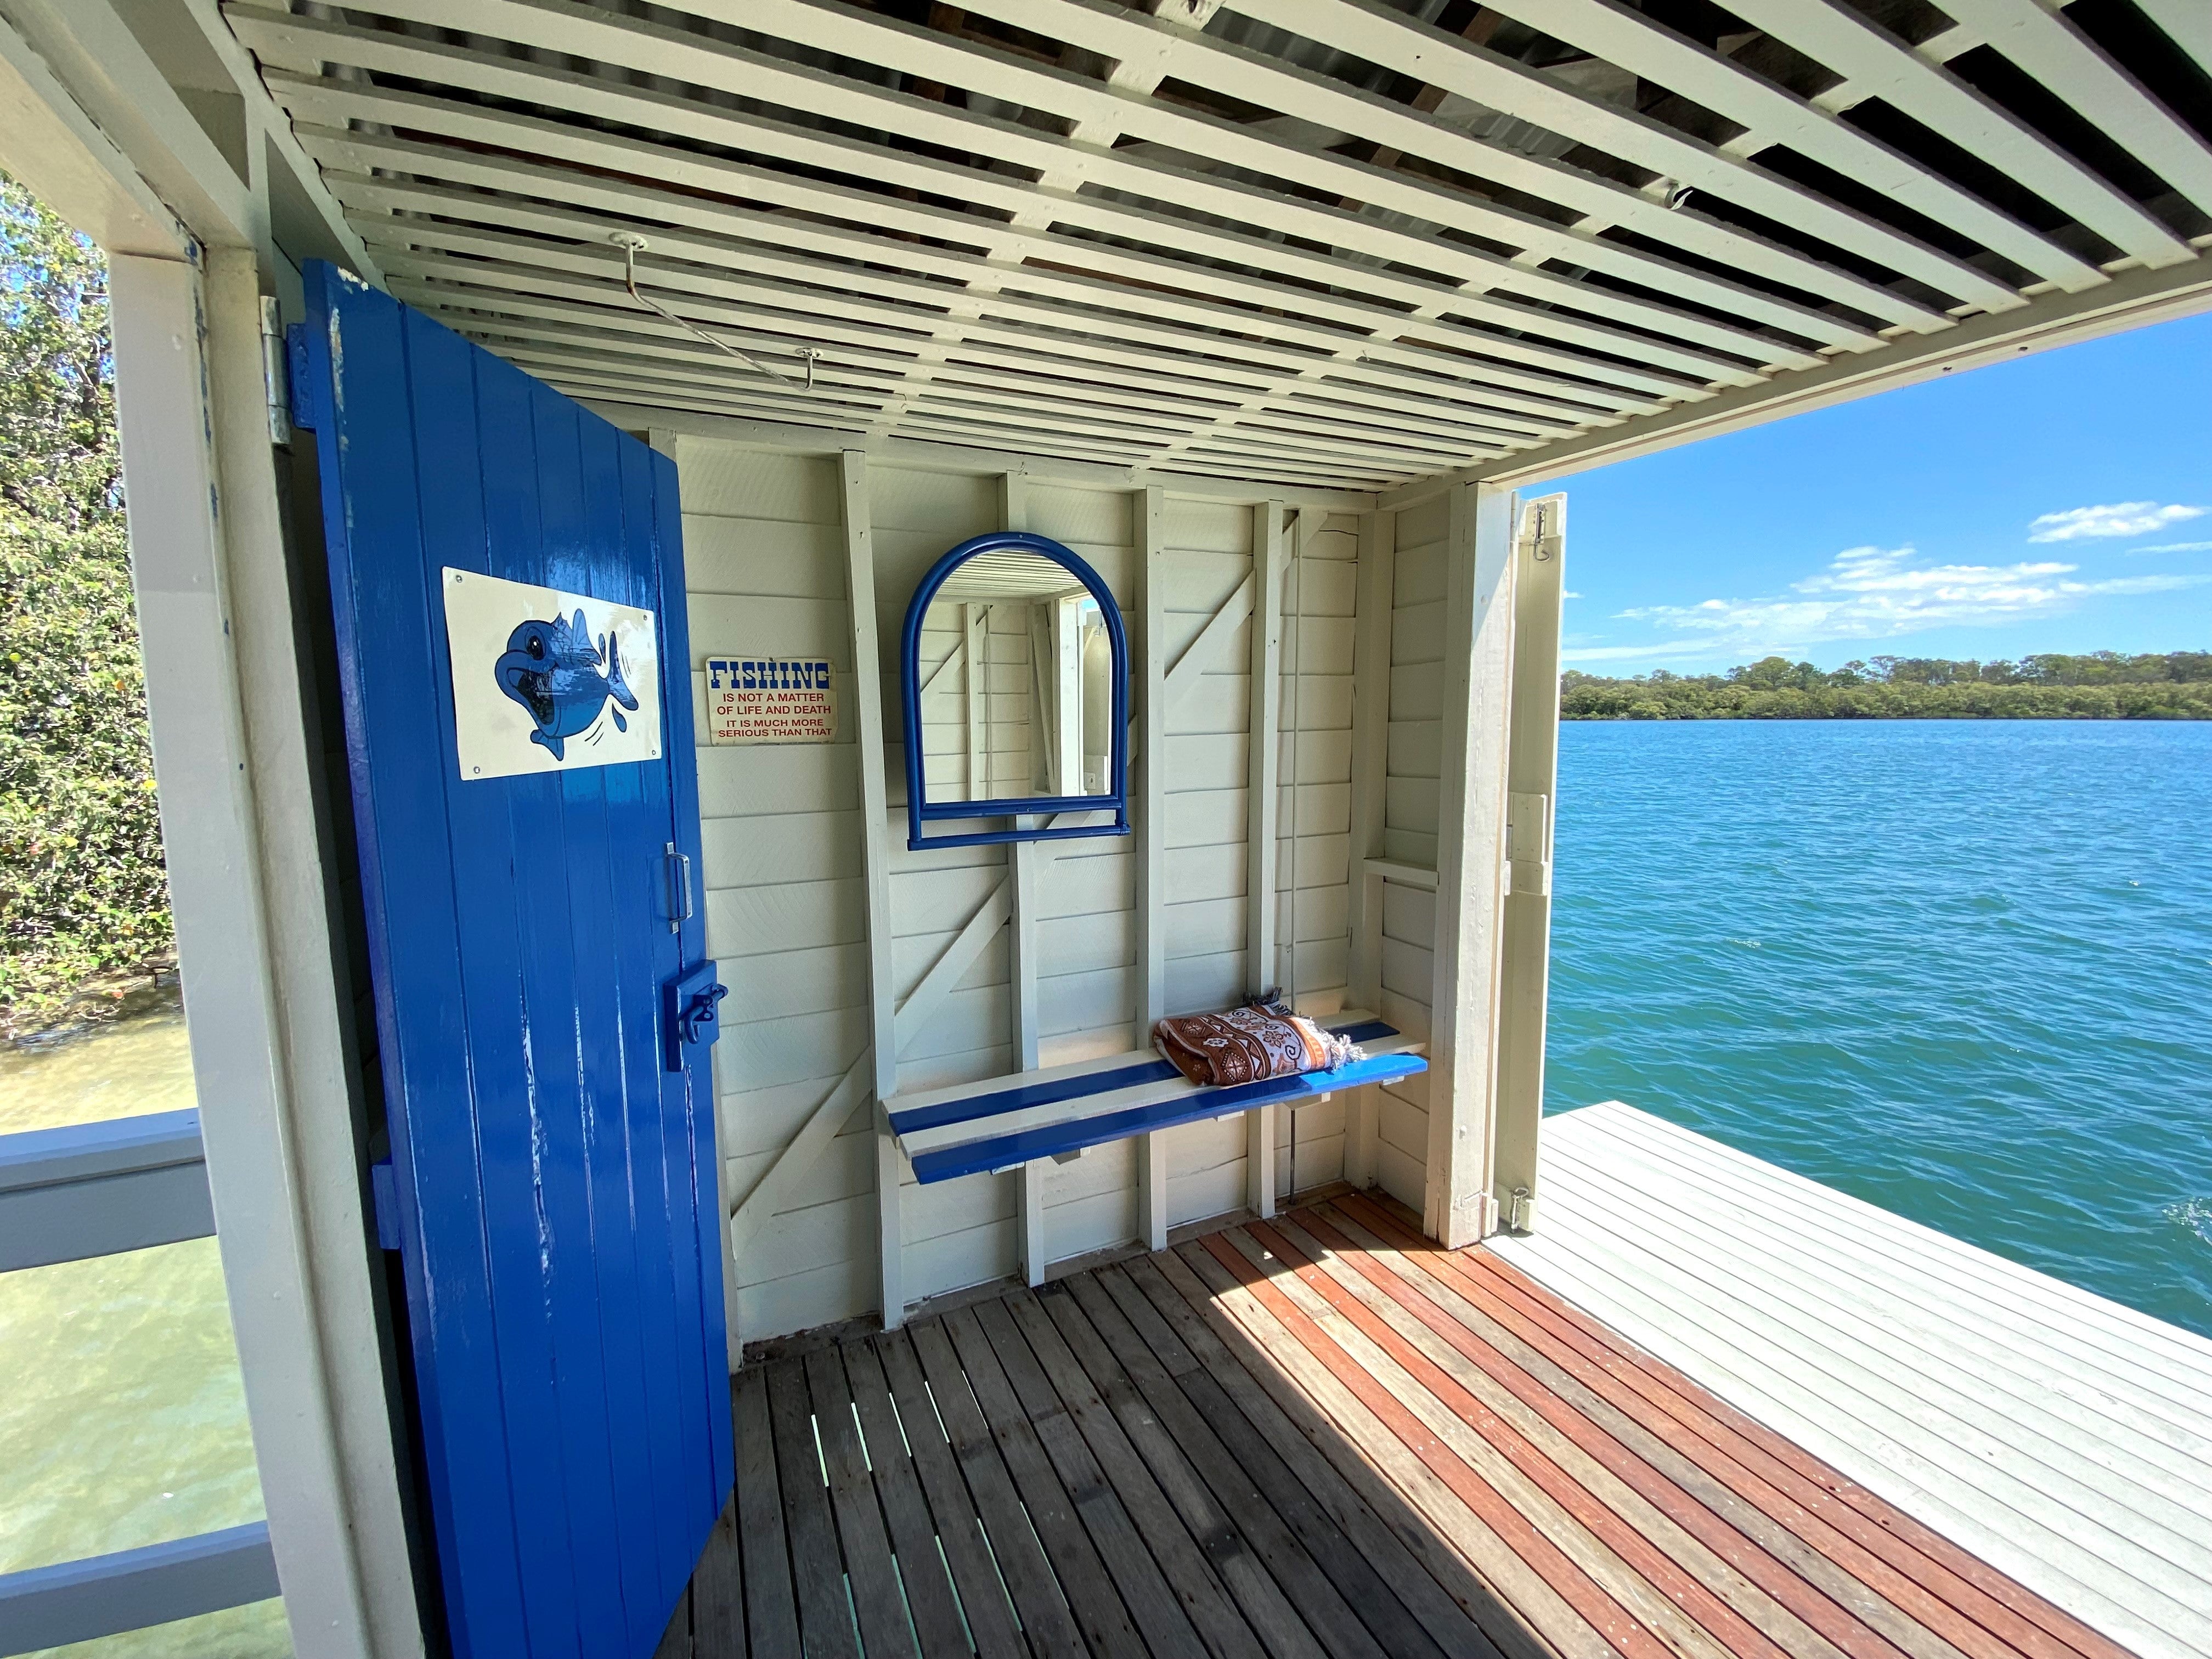 Inside the privately owned Maroochy Wheel House